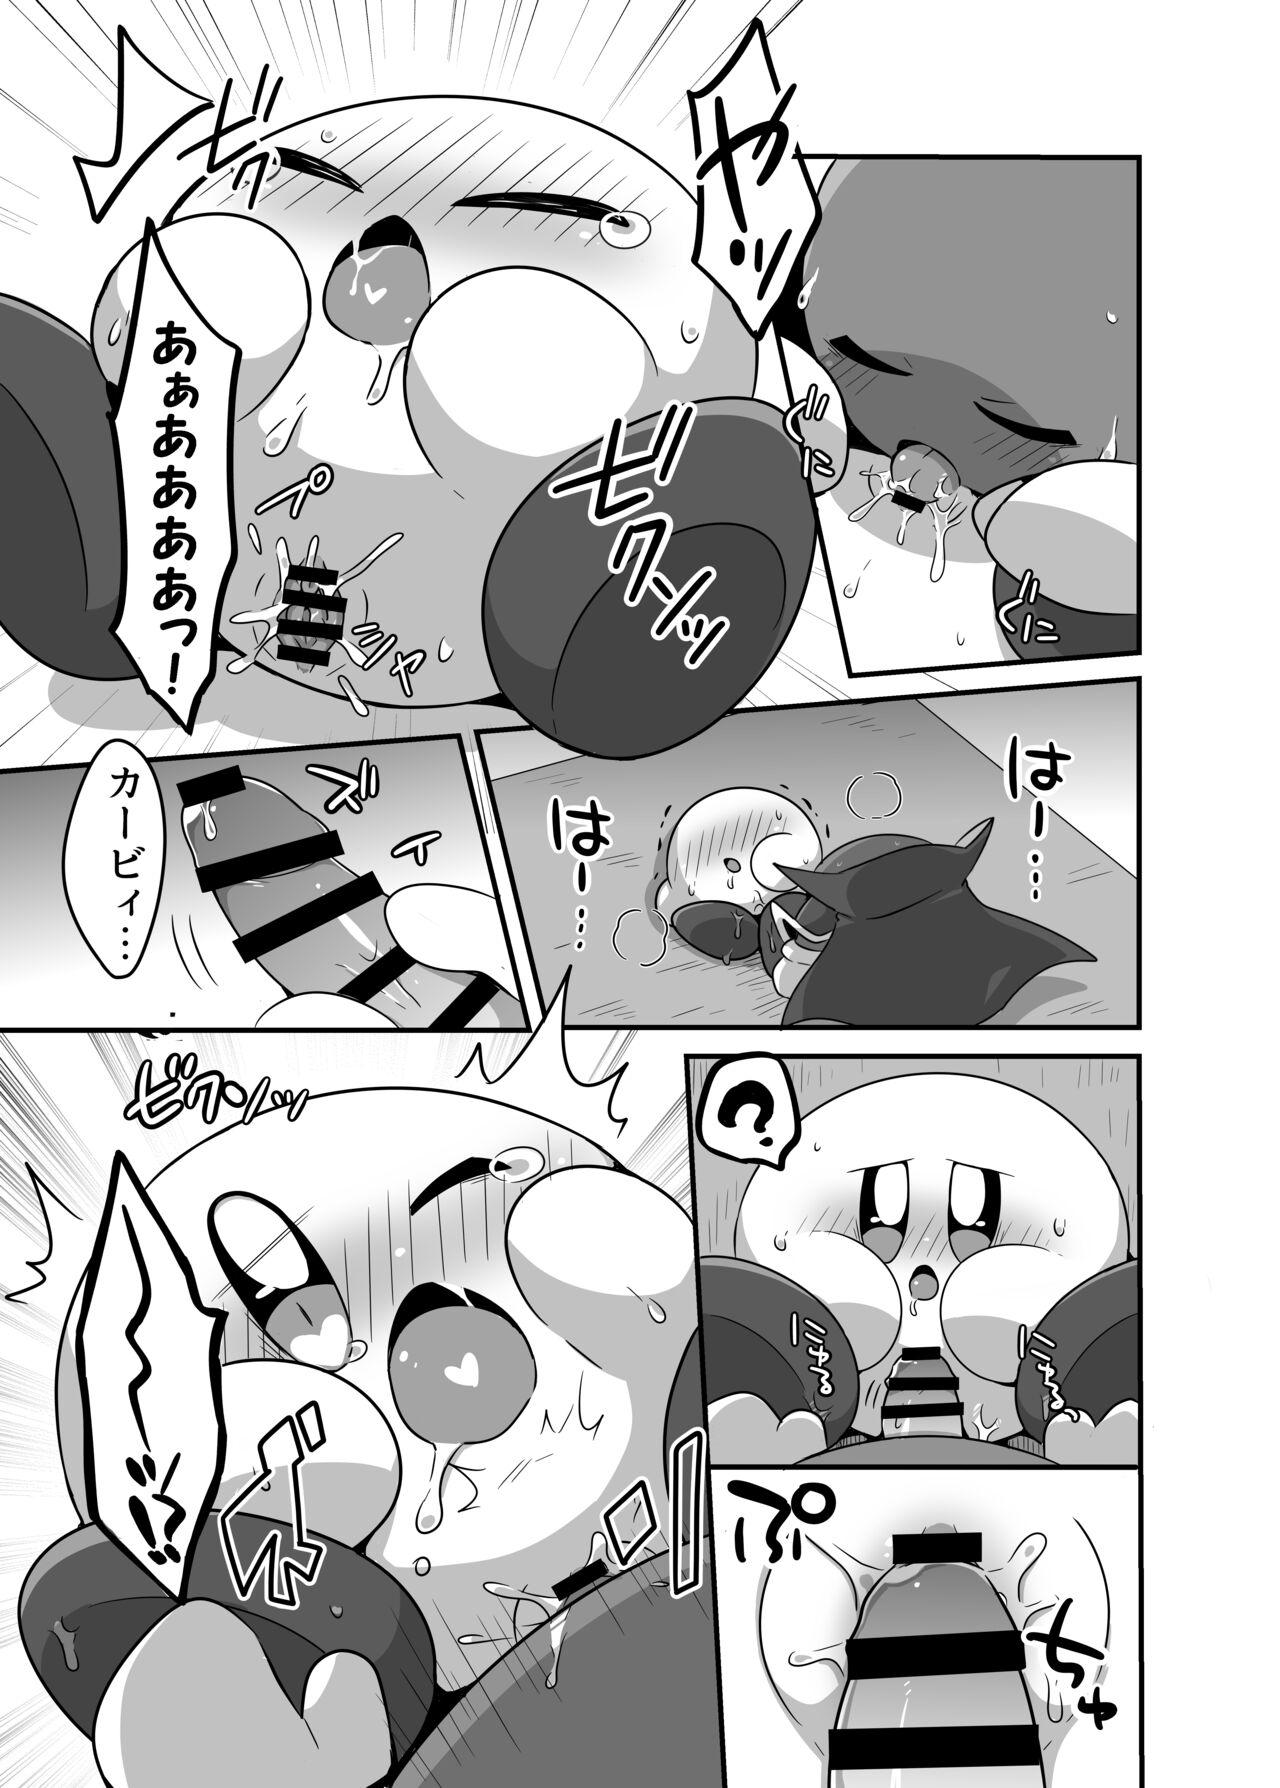 Magrinha I Want to Do XXX Even For Spheres! - Kirby Bra - Page 11